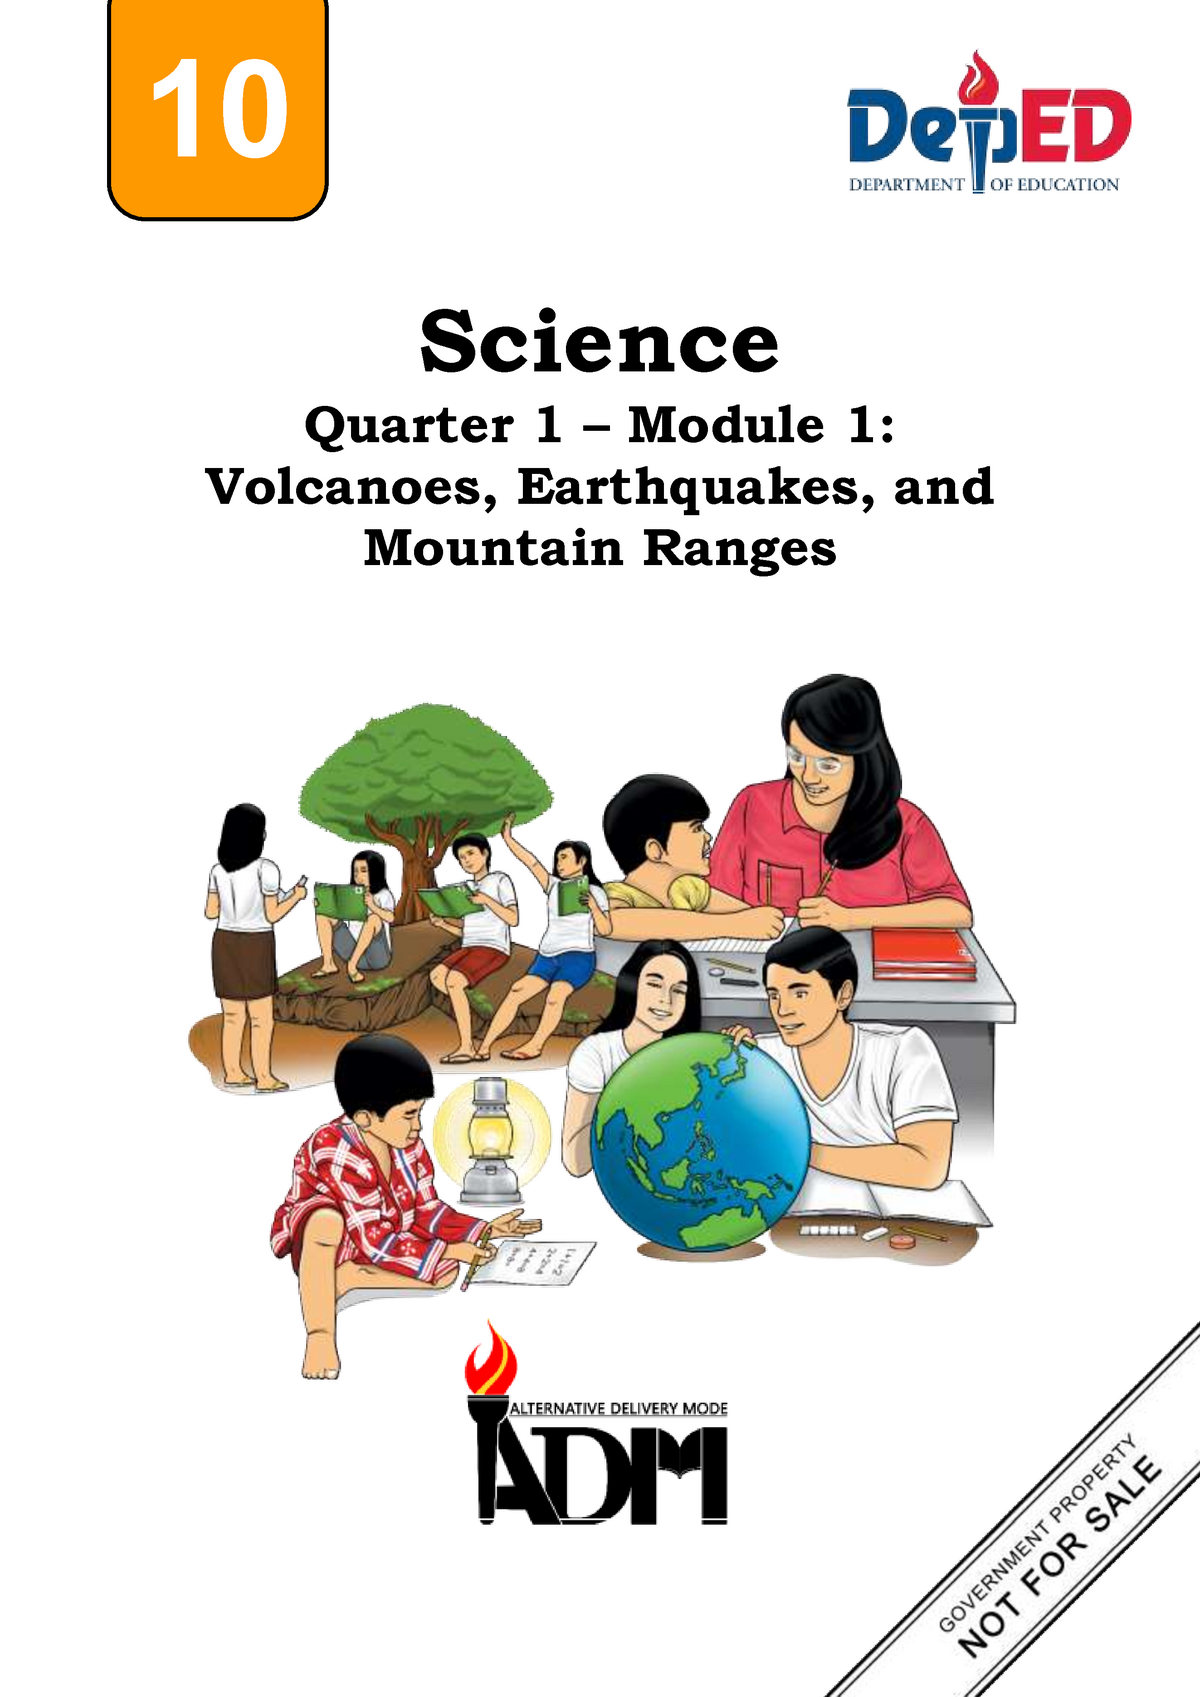 science-10-q1-mod1-volcanoes-earthquakes-and-mountain-ranges-final